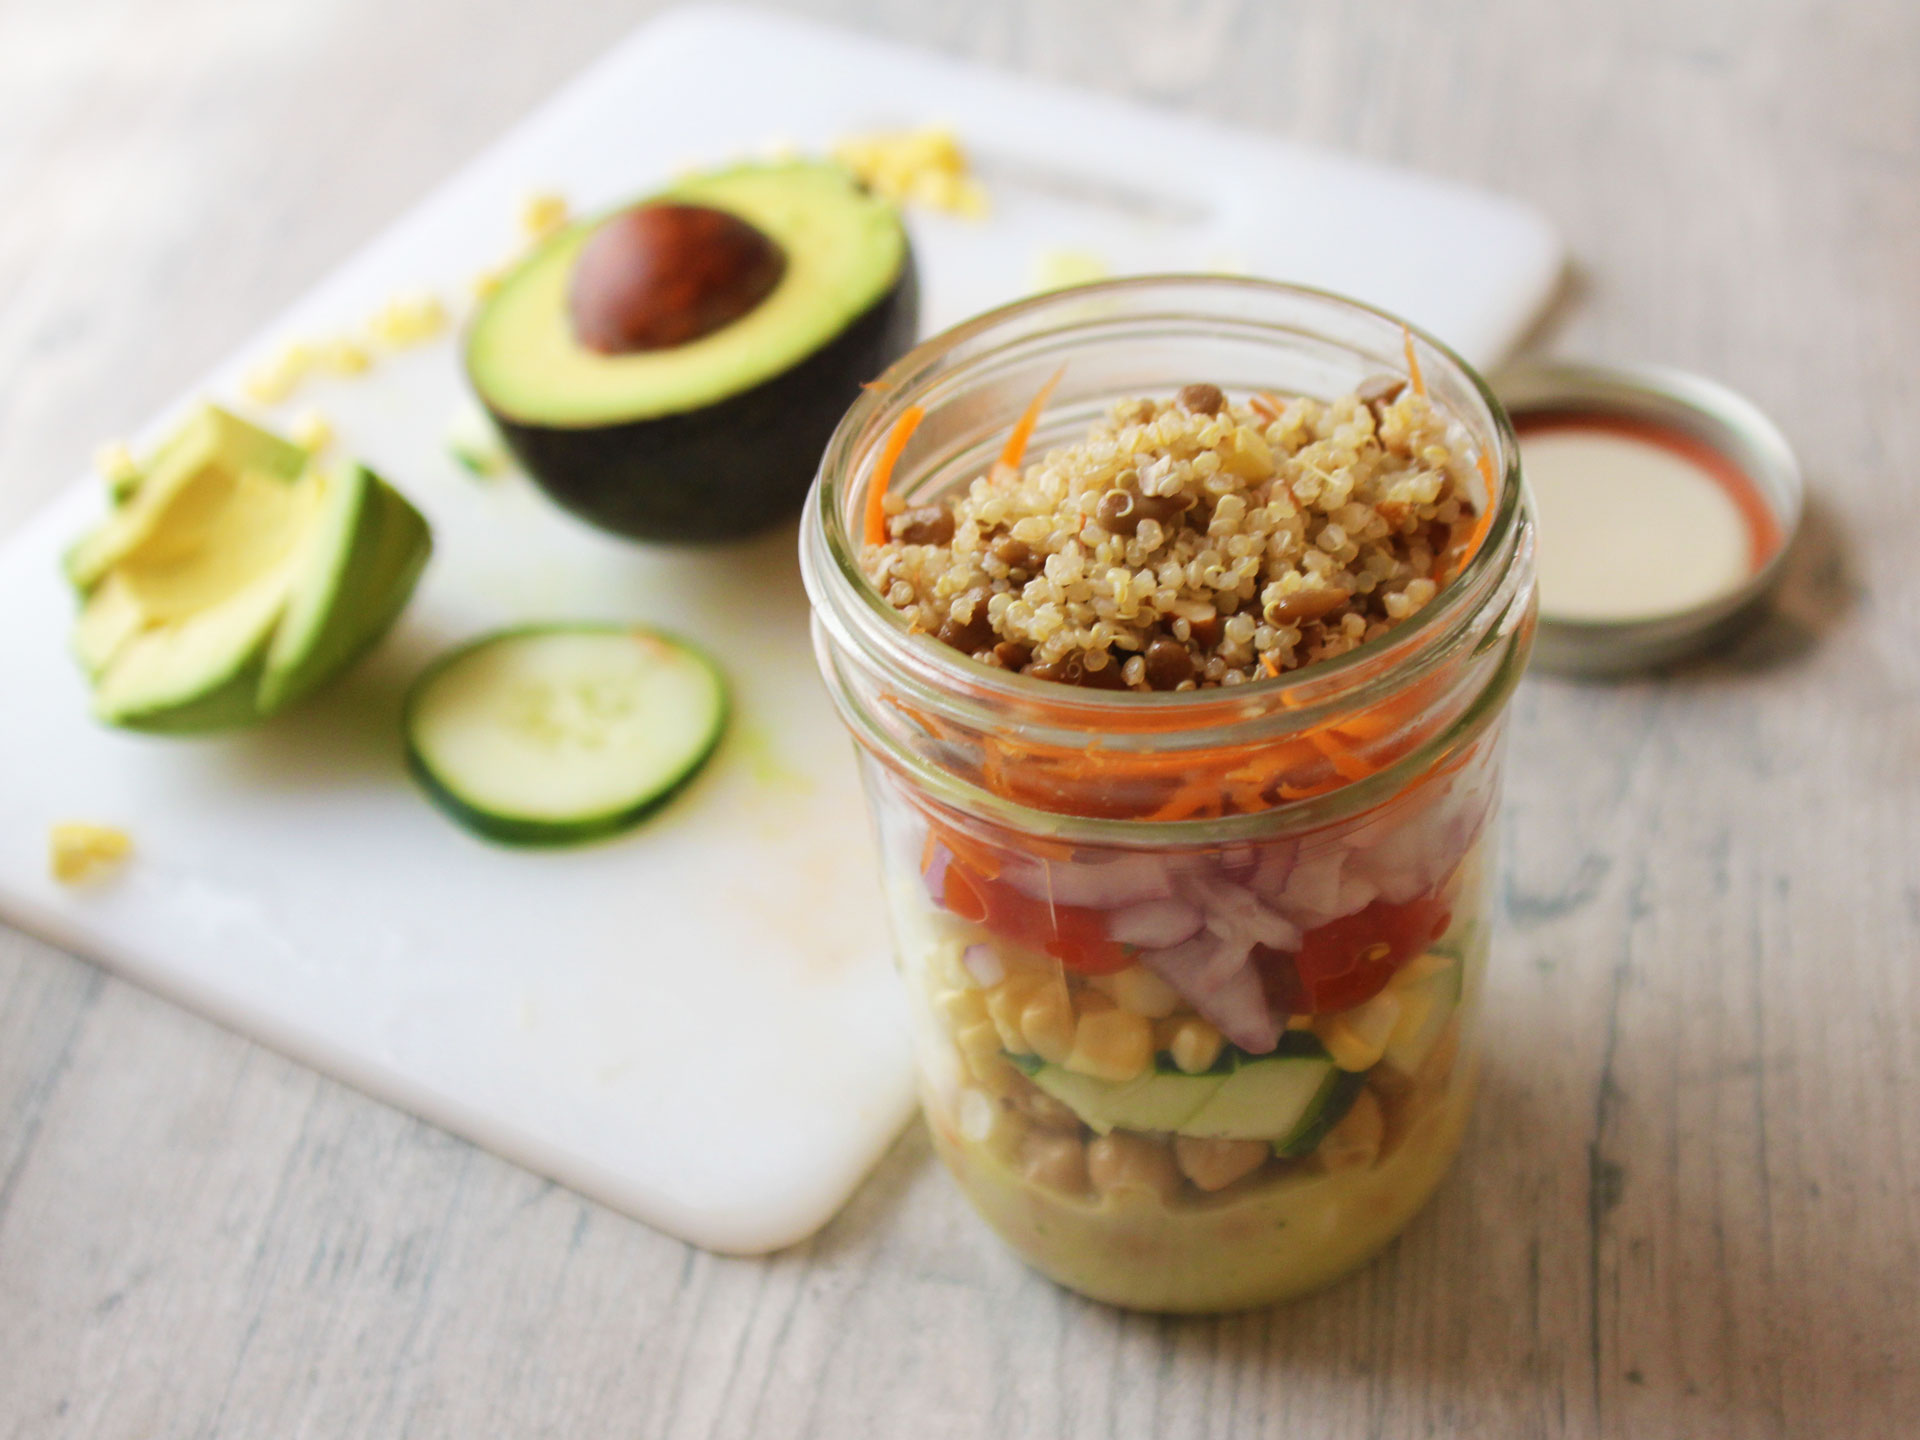 a jar full of salad ingredients with a cut avocado on the side  